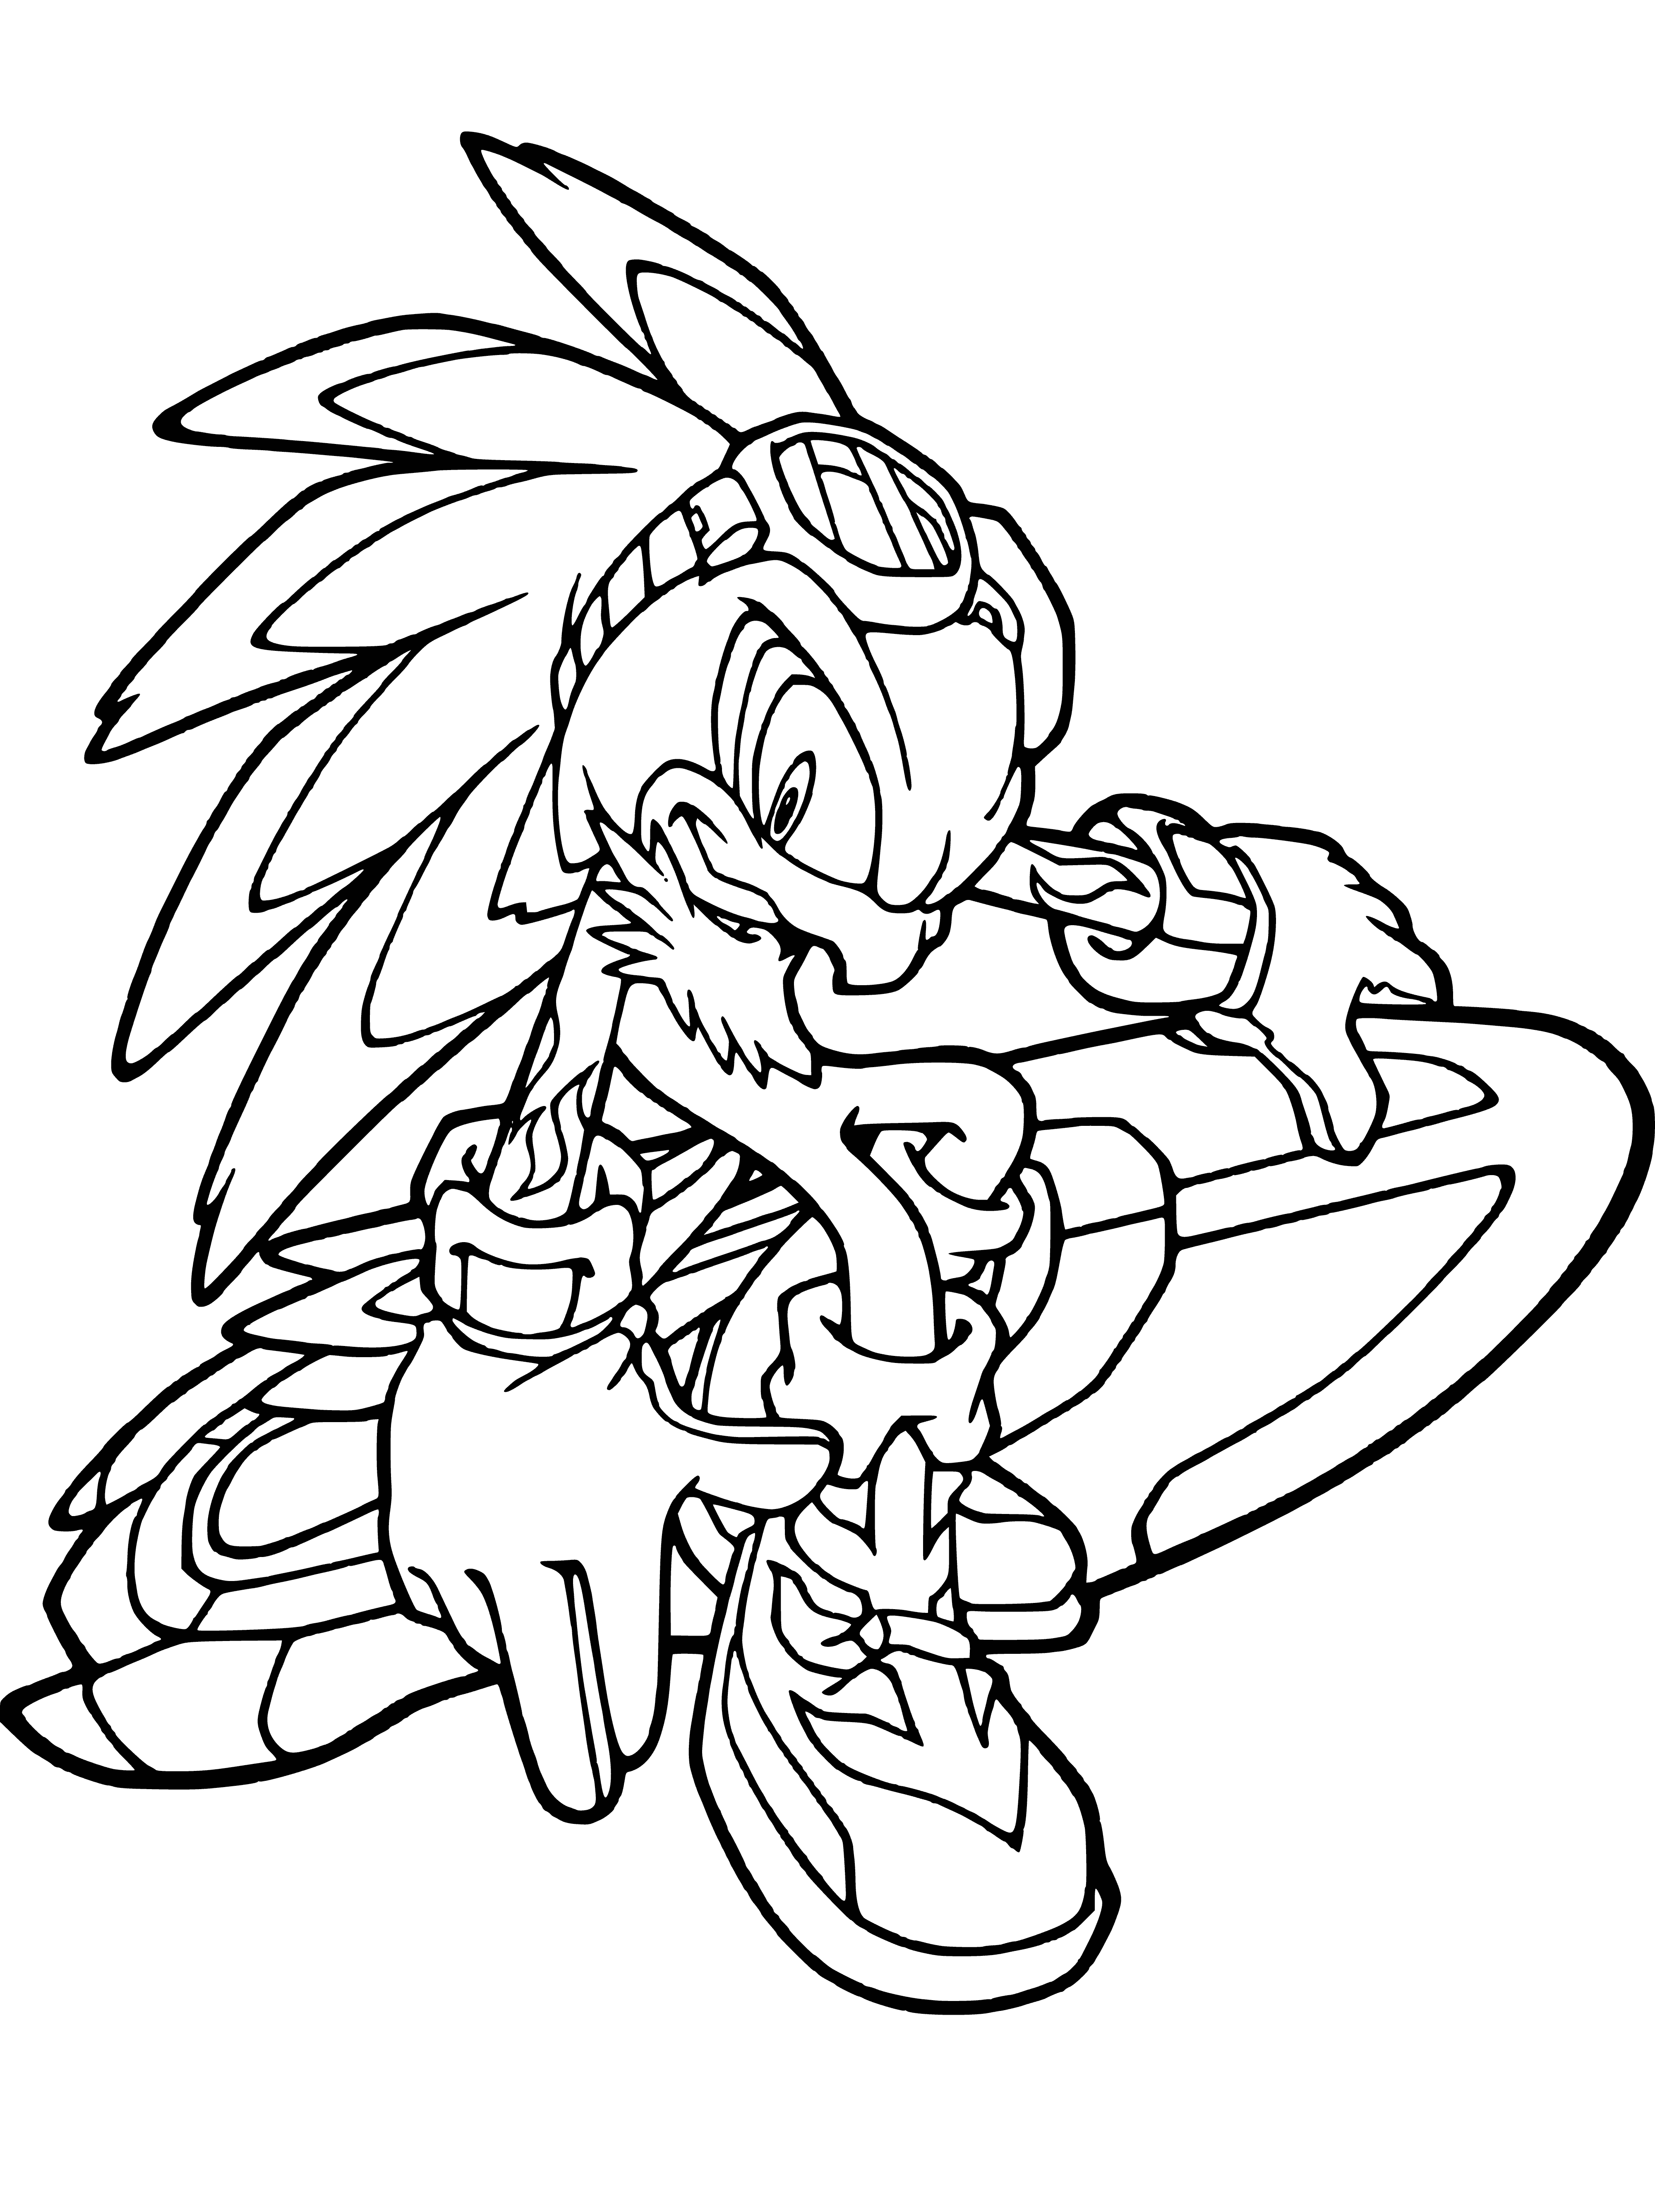 coloring page: Sonic stands atop the checkered-winged "Jet Hawk" airplane, arms crossed.